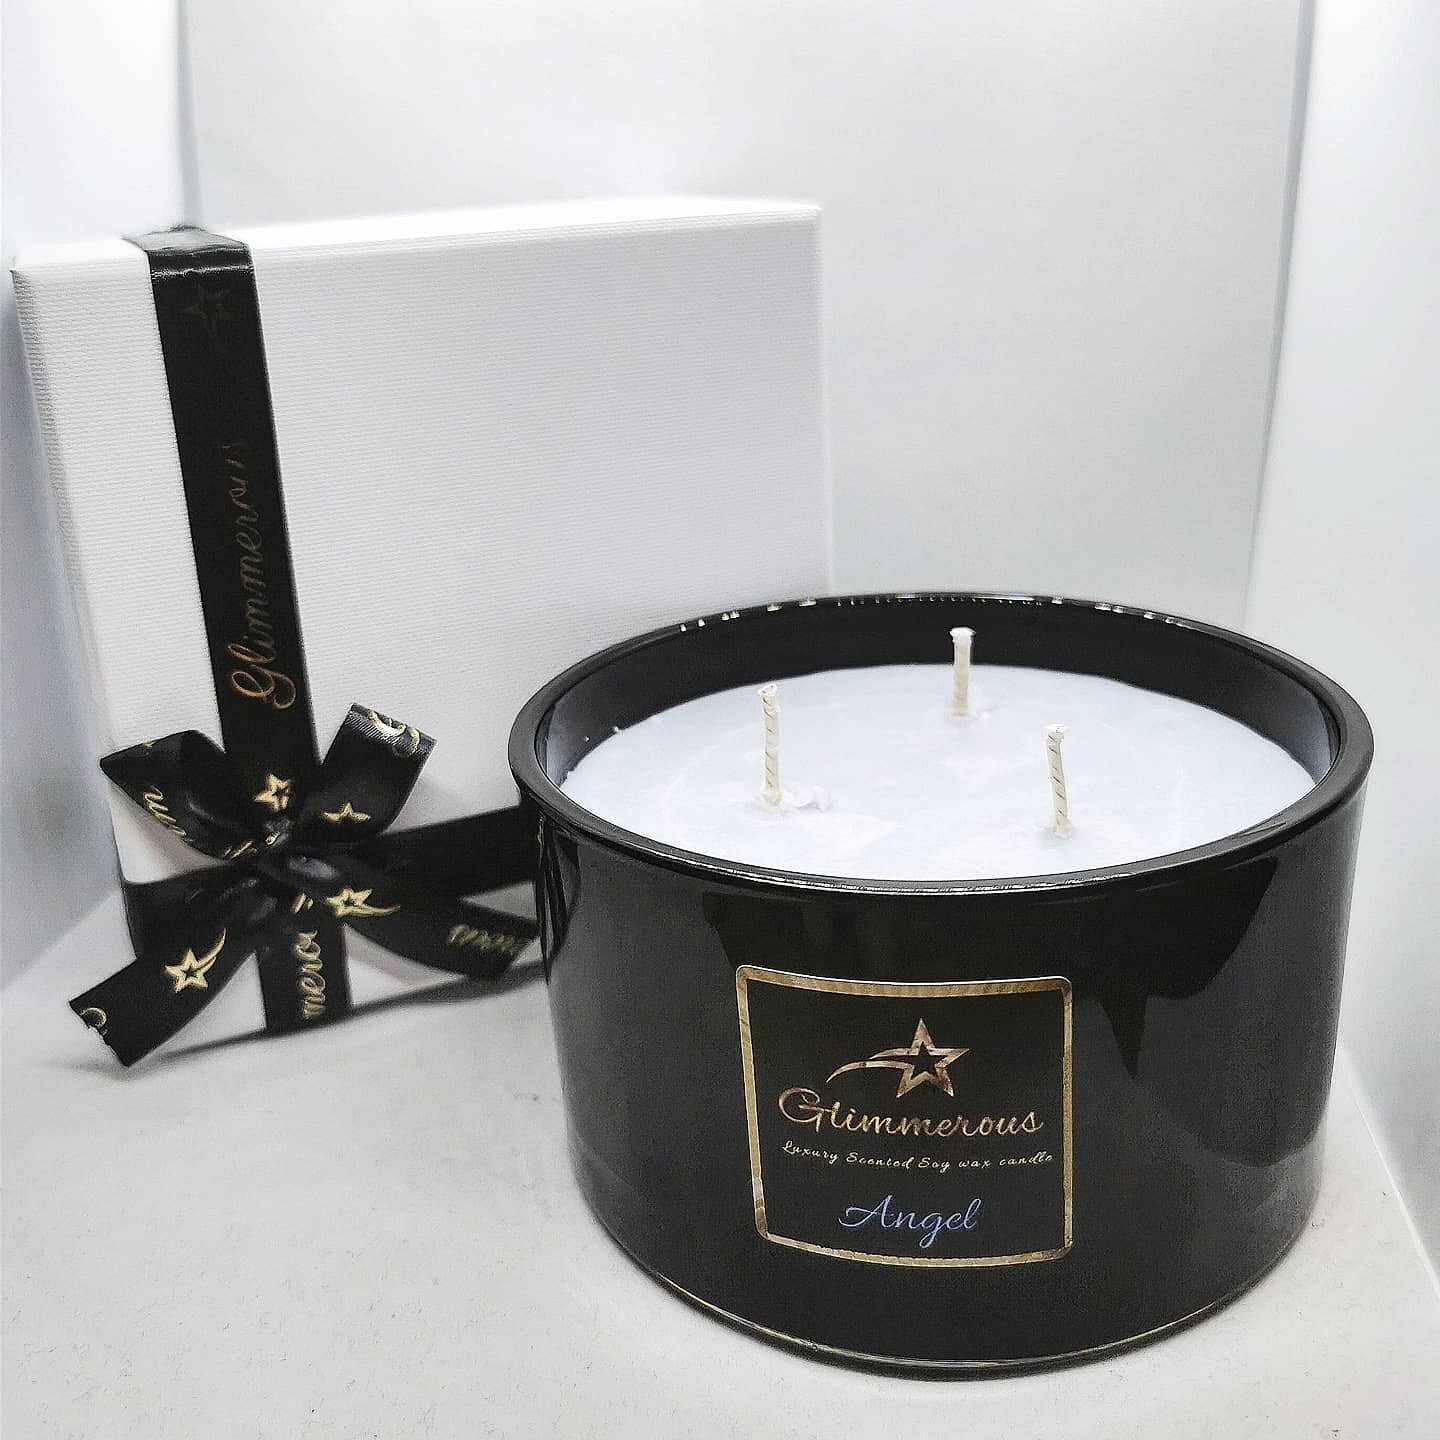 Large Fresh Linen Soy Wax Candles. 3 Wick Candles